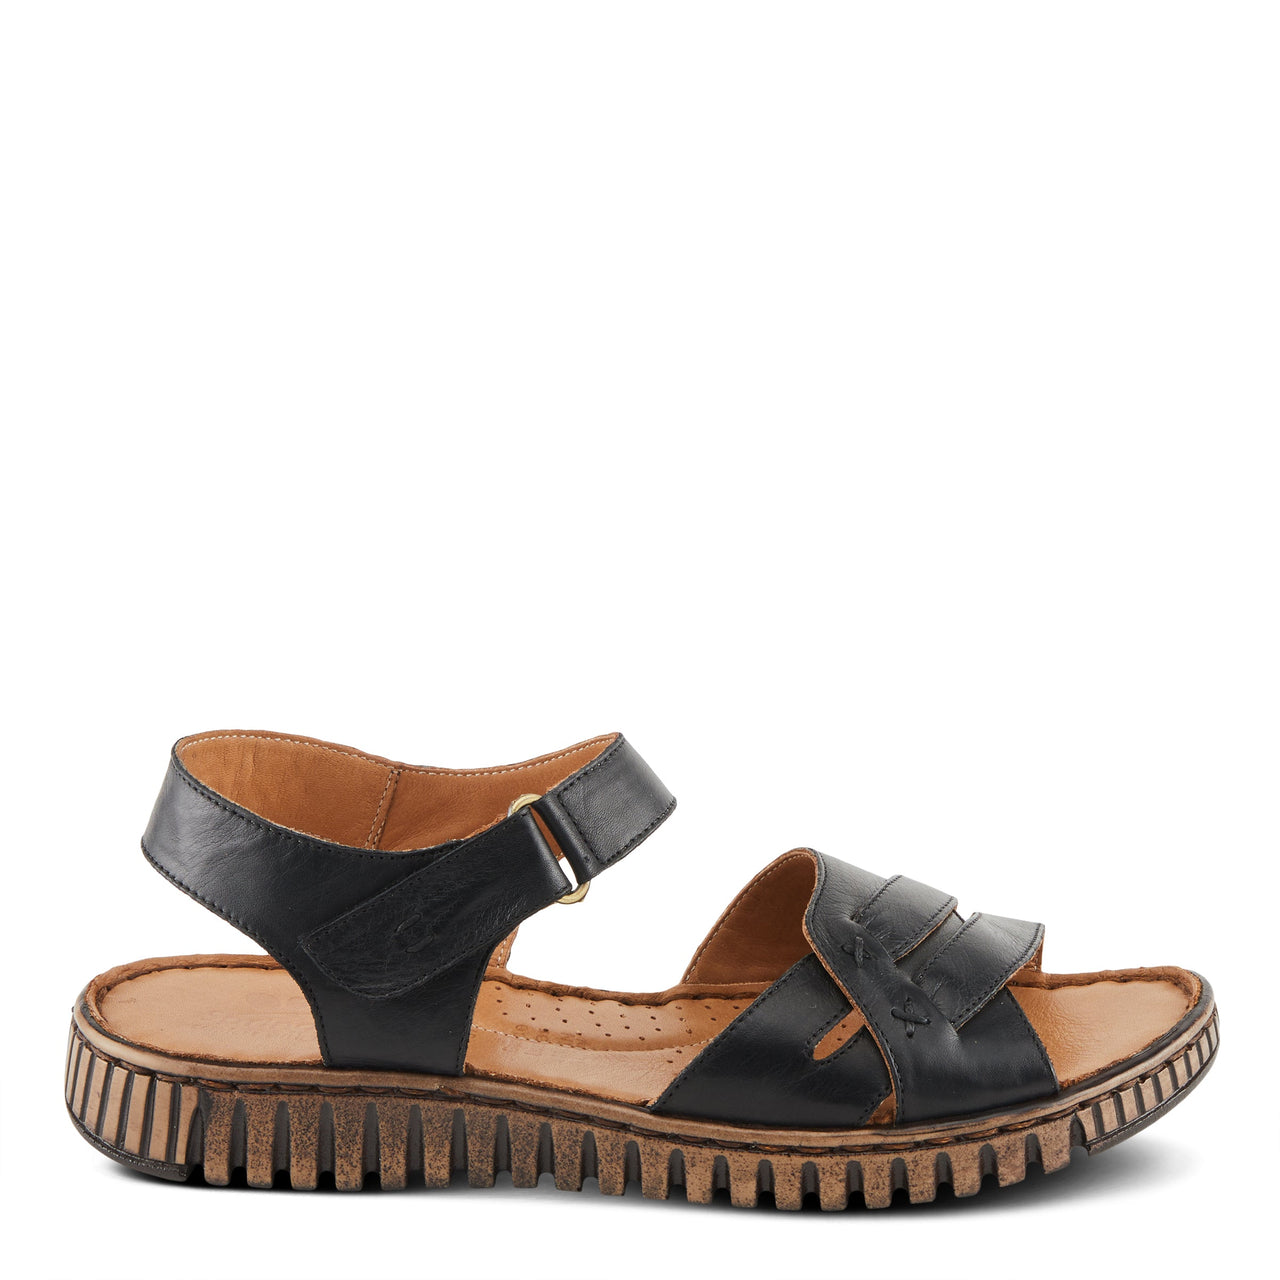 Stylish and comfortable Spring Step Nochella Sandals in black leather